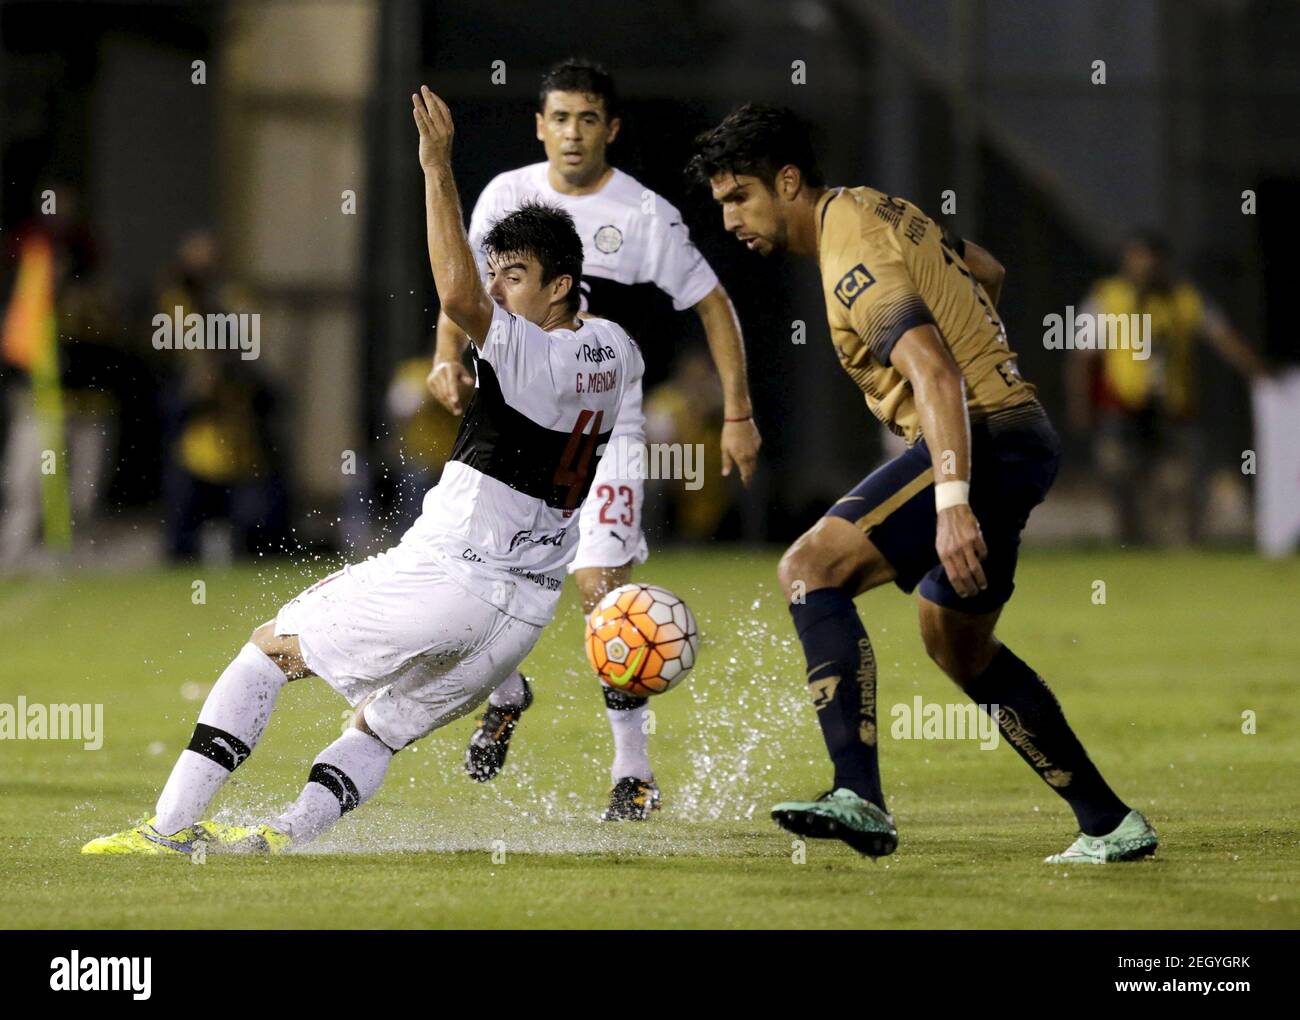 Football Soccer -Mexico's Pumas v Paraguay's Olimpia - Copa Libertadores - Defensores del Chaco Stadium, Asuncion, Paraguay, 1/3/2016   Eduardo Herrera (R) of Mexico's Pumas and Gustavo Mencia (C) of Paraguay's Olimpia fight for the ball. REUTERS/Jorge Adorno   Picture Supplied by Action Images Stock Photo